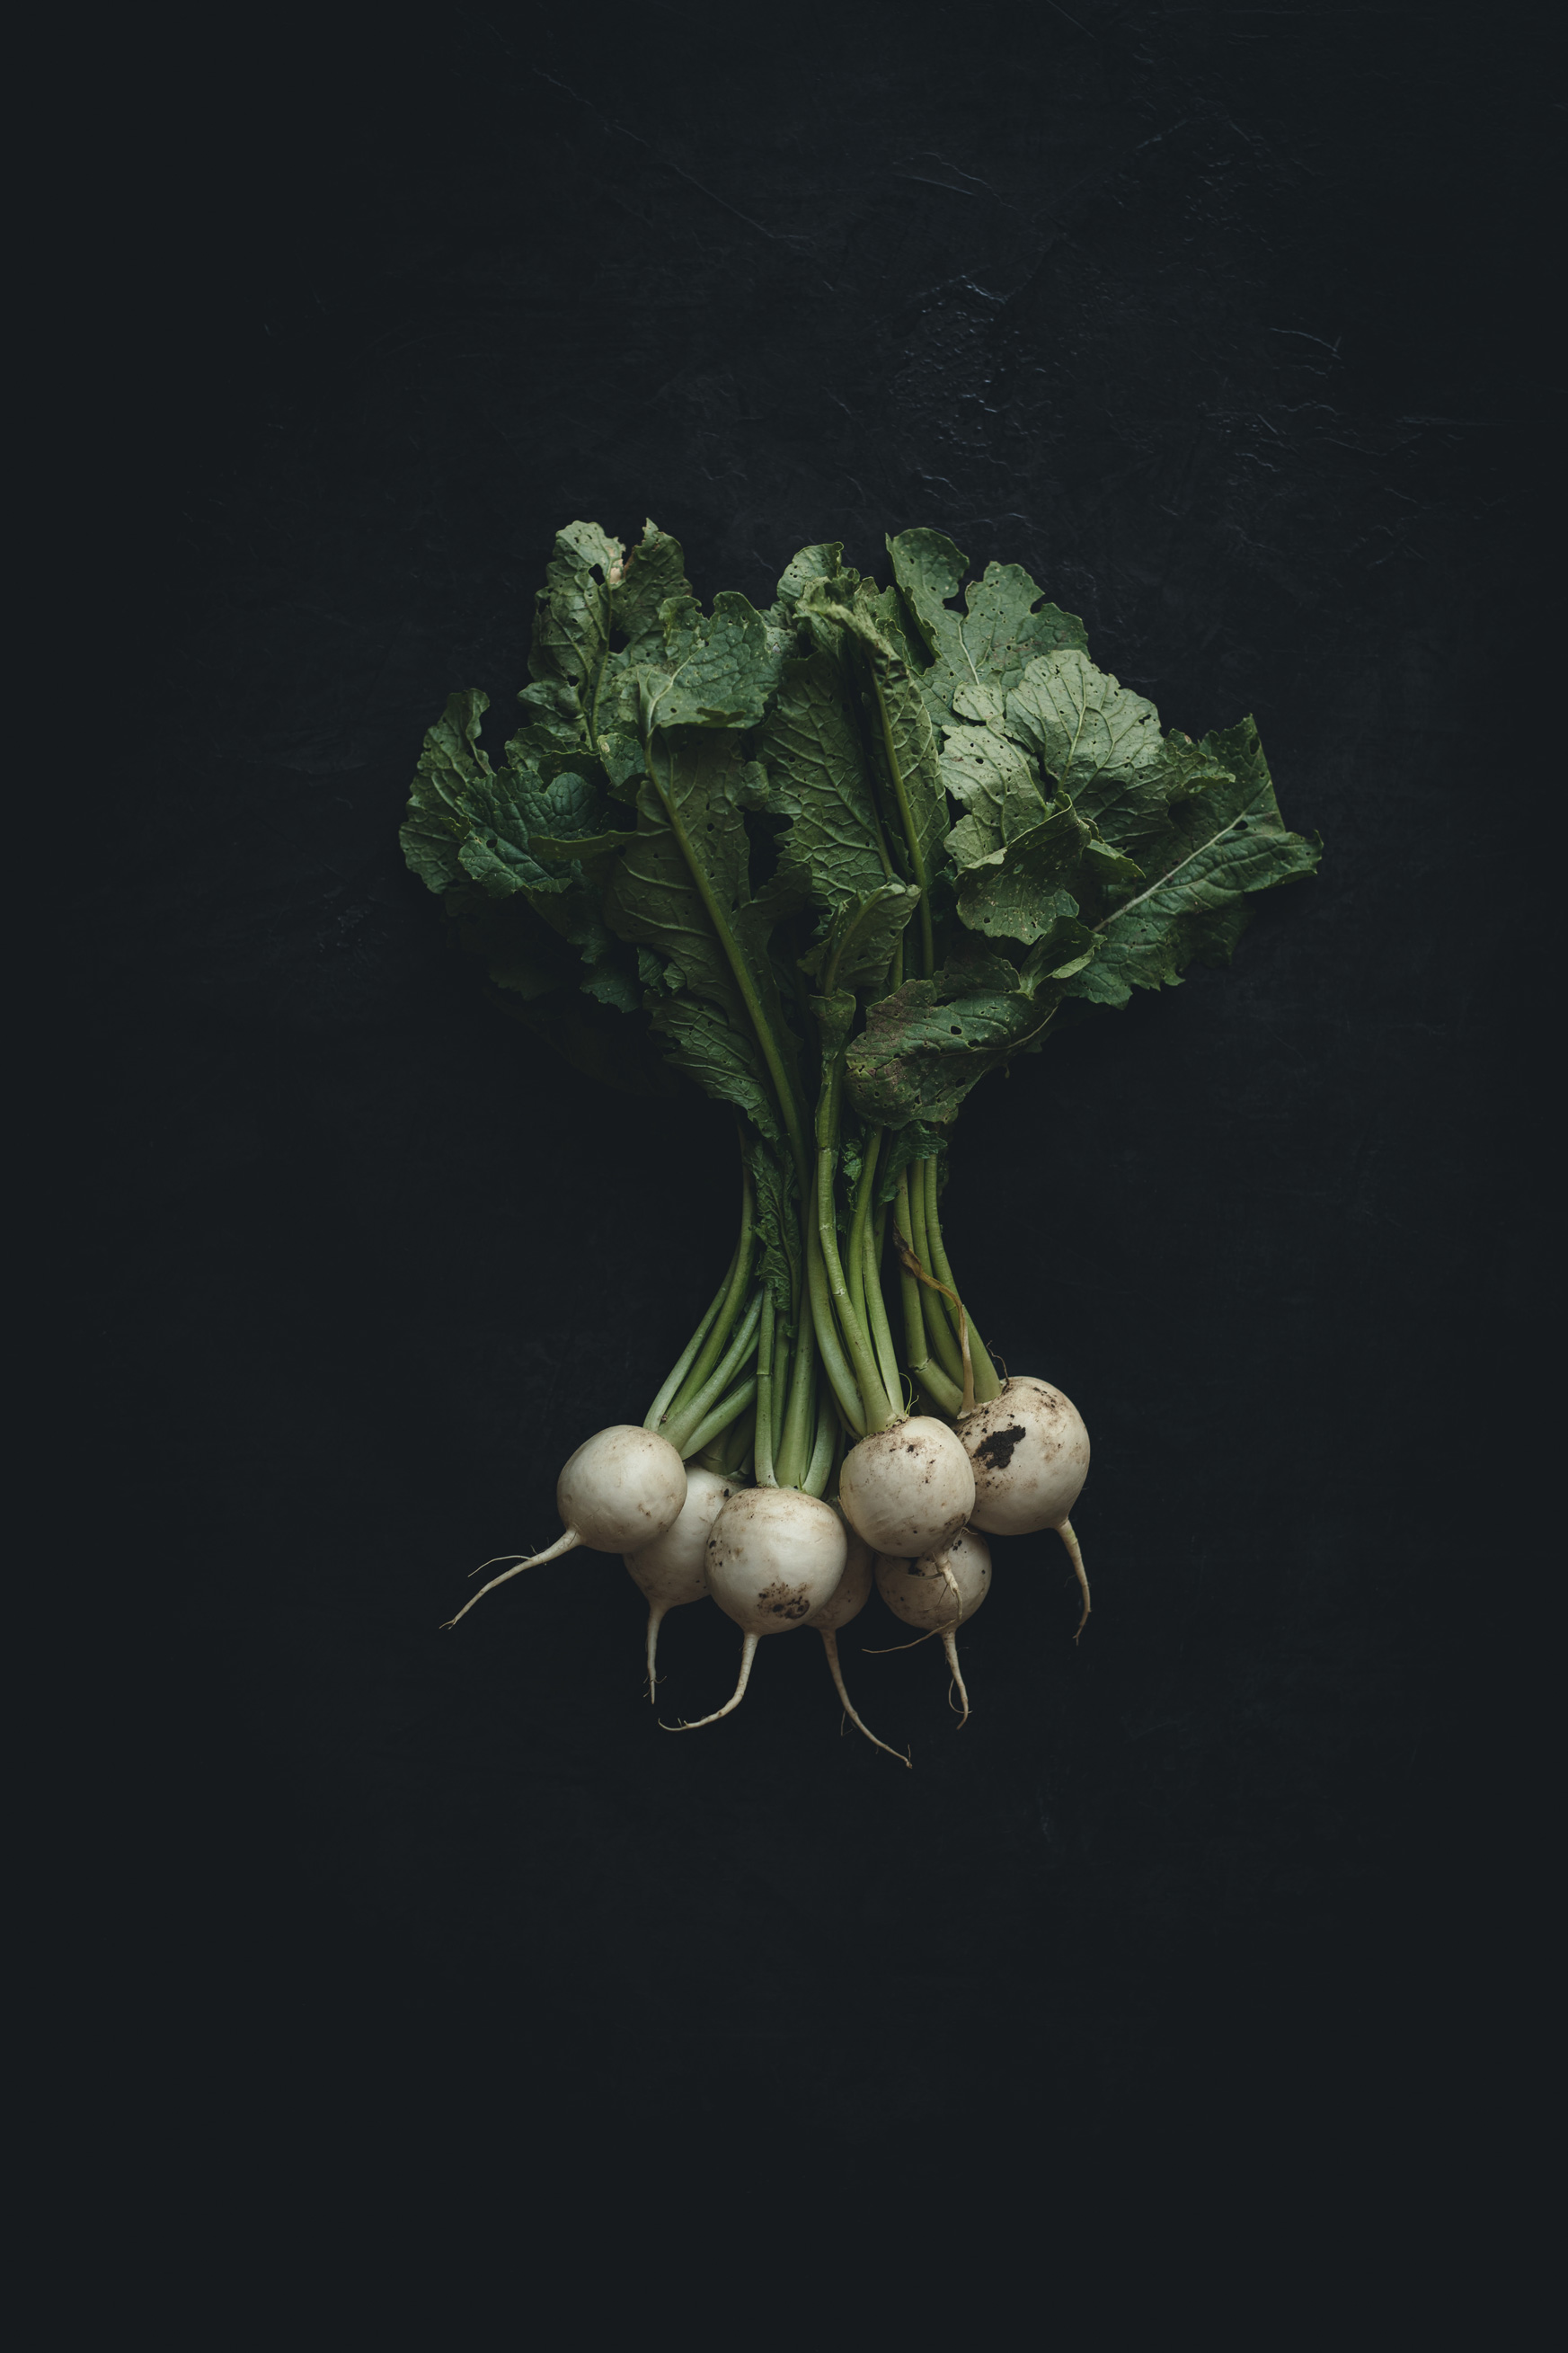 Turnips on a black background from the Moody Food series by John Robson Photography